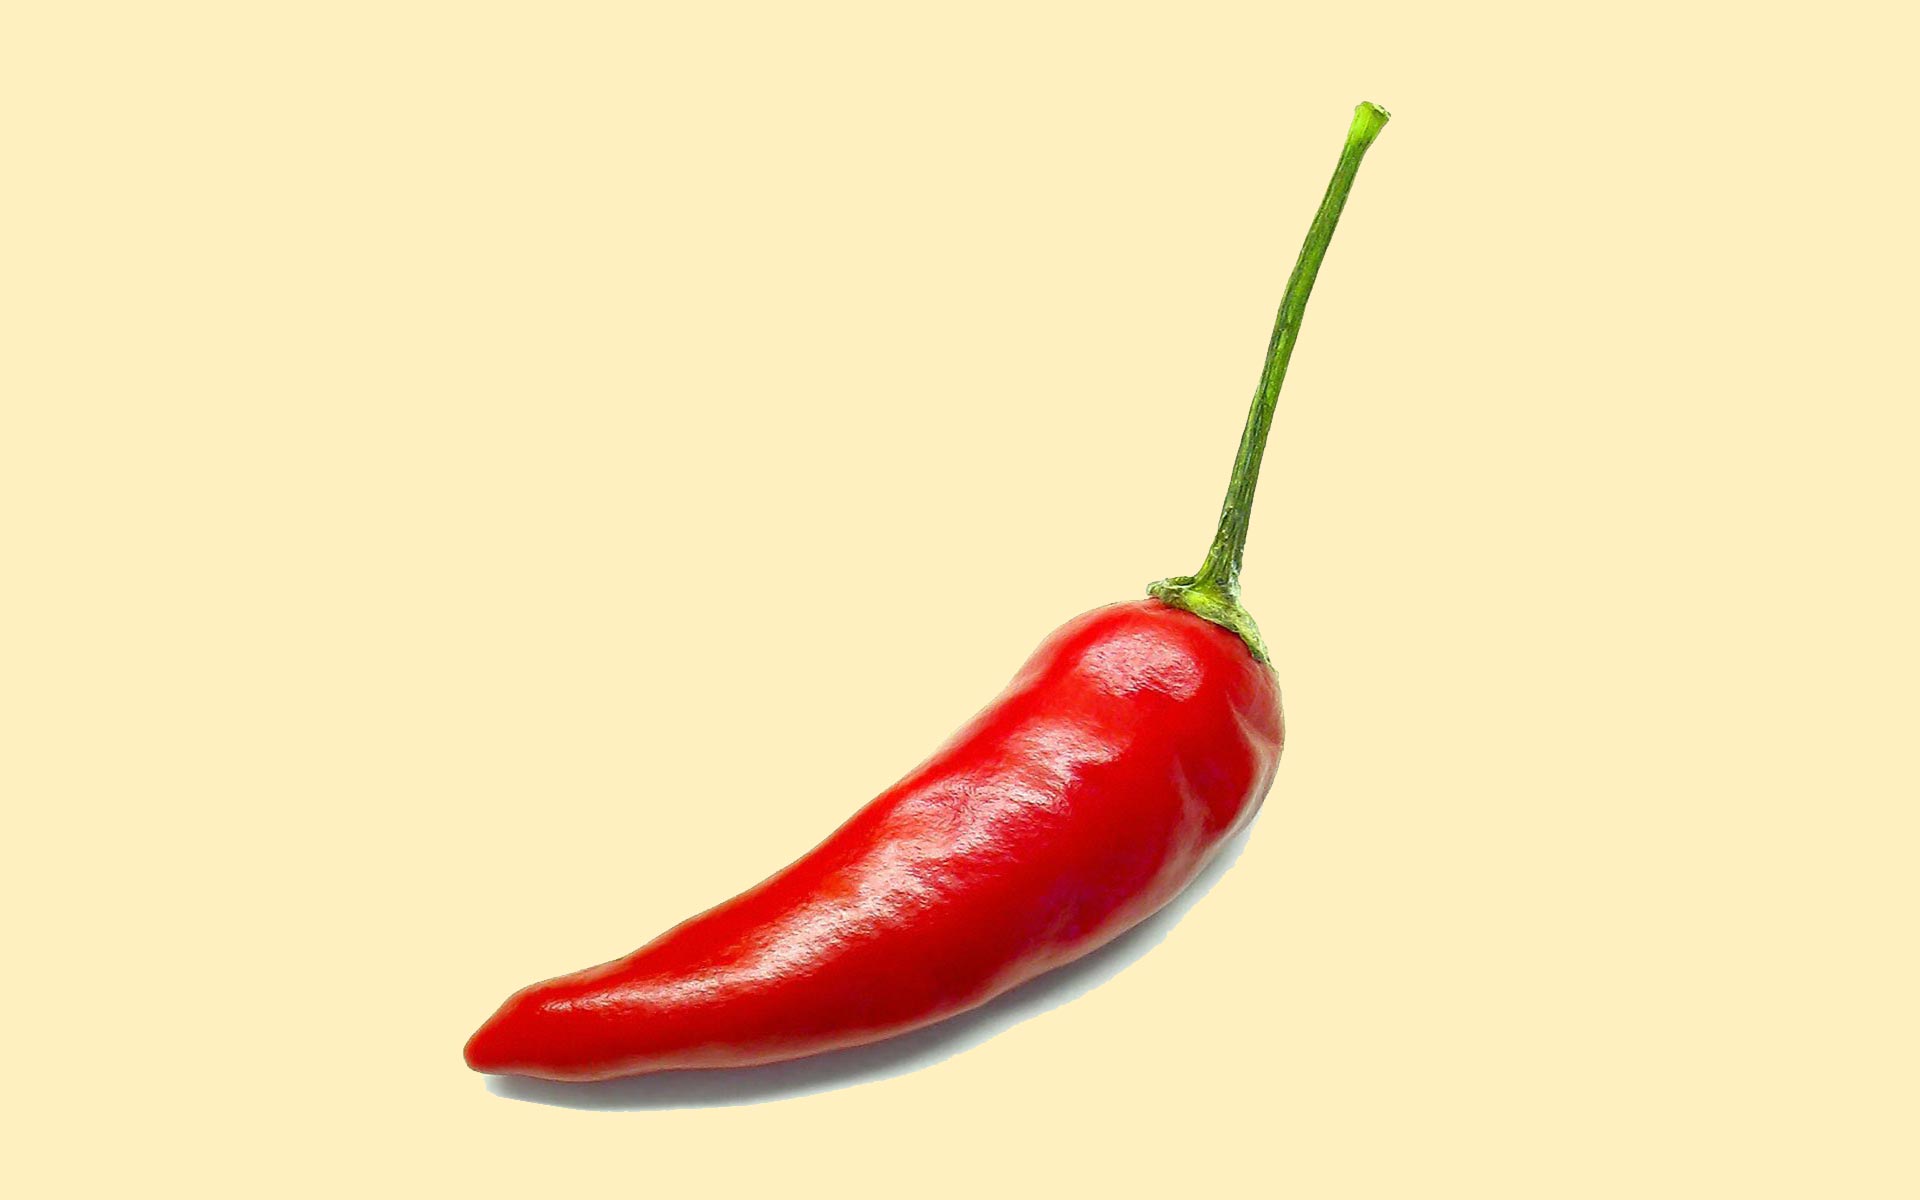 Chili Pepper Backgrounds Chili Pepper Powerpoint Free Backgrounds